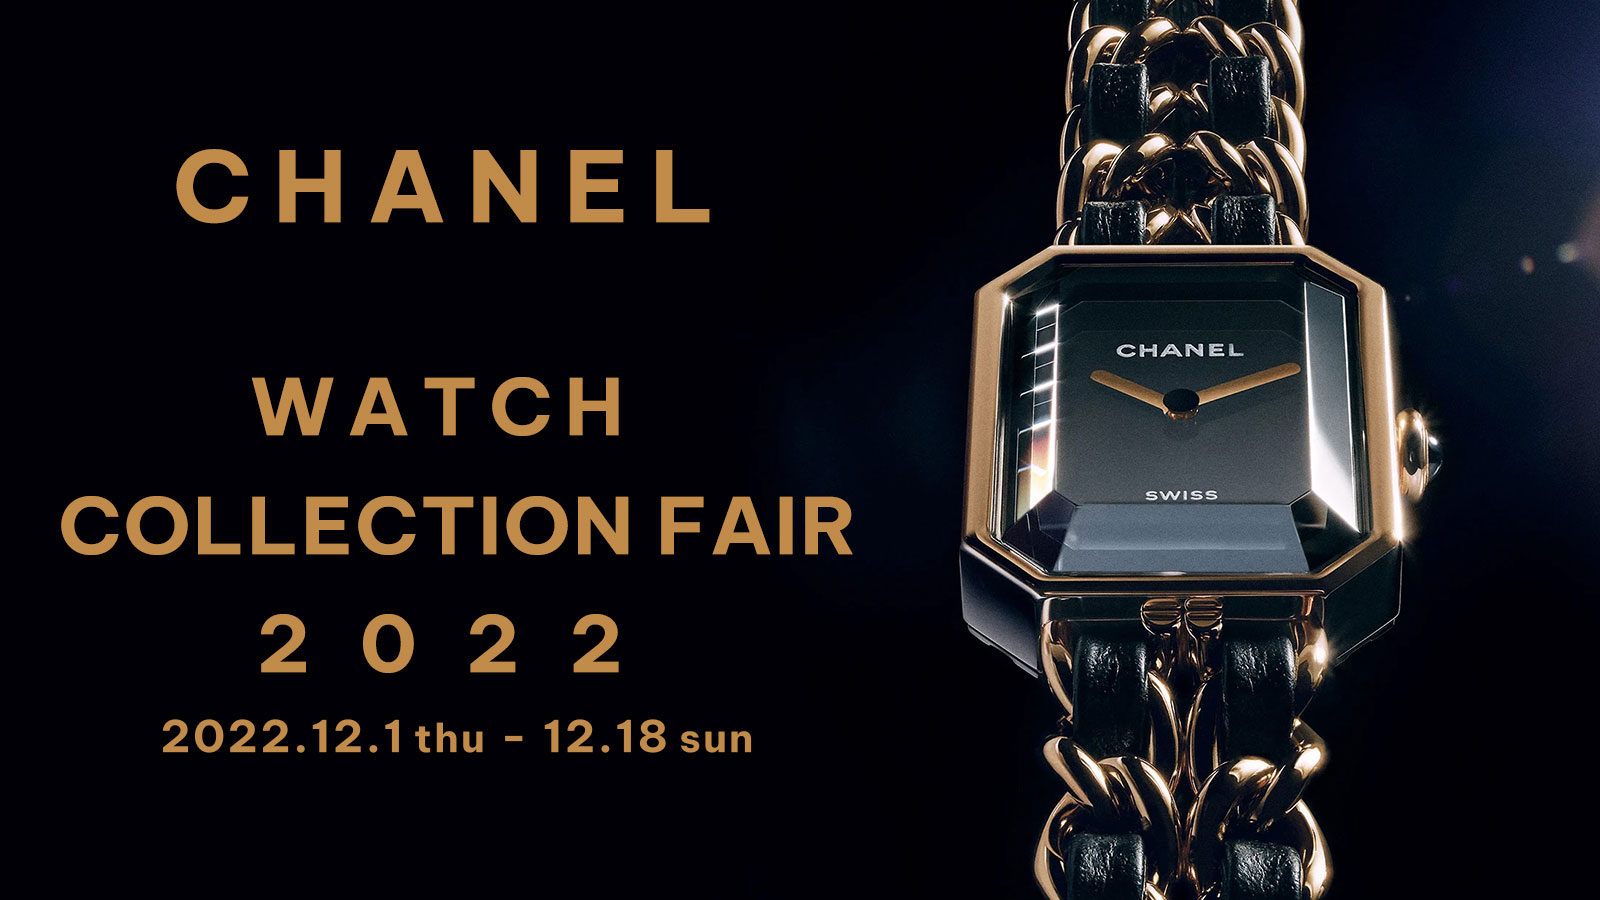 CHANEL WATCH COLLECTION FAIR 2022